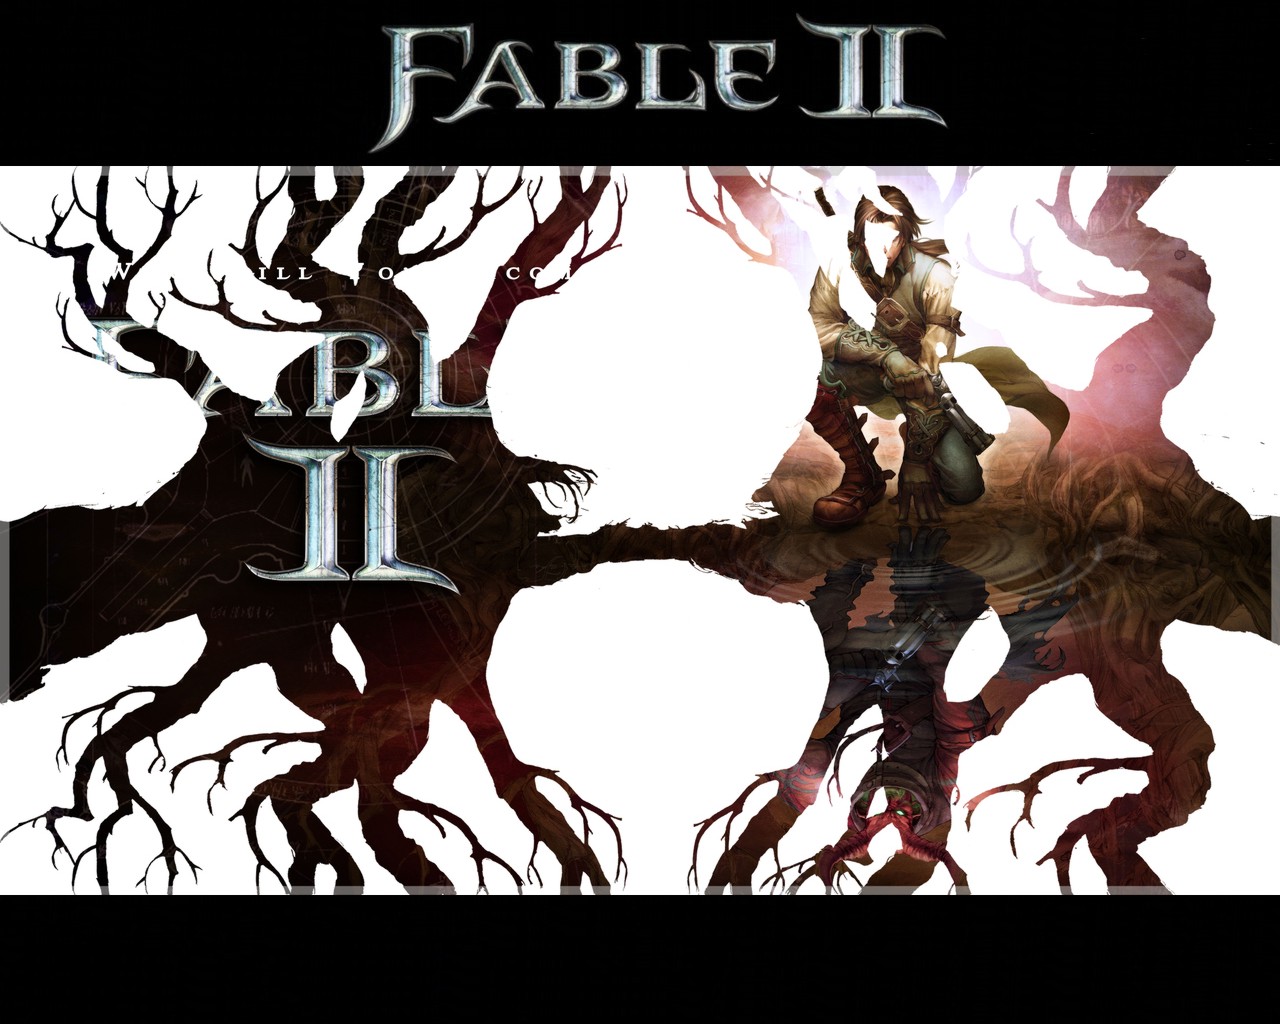 Download High quality Fable 2 wallpaper / Games / 1280x1024